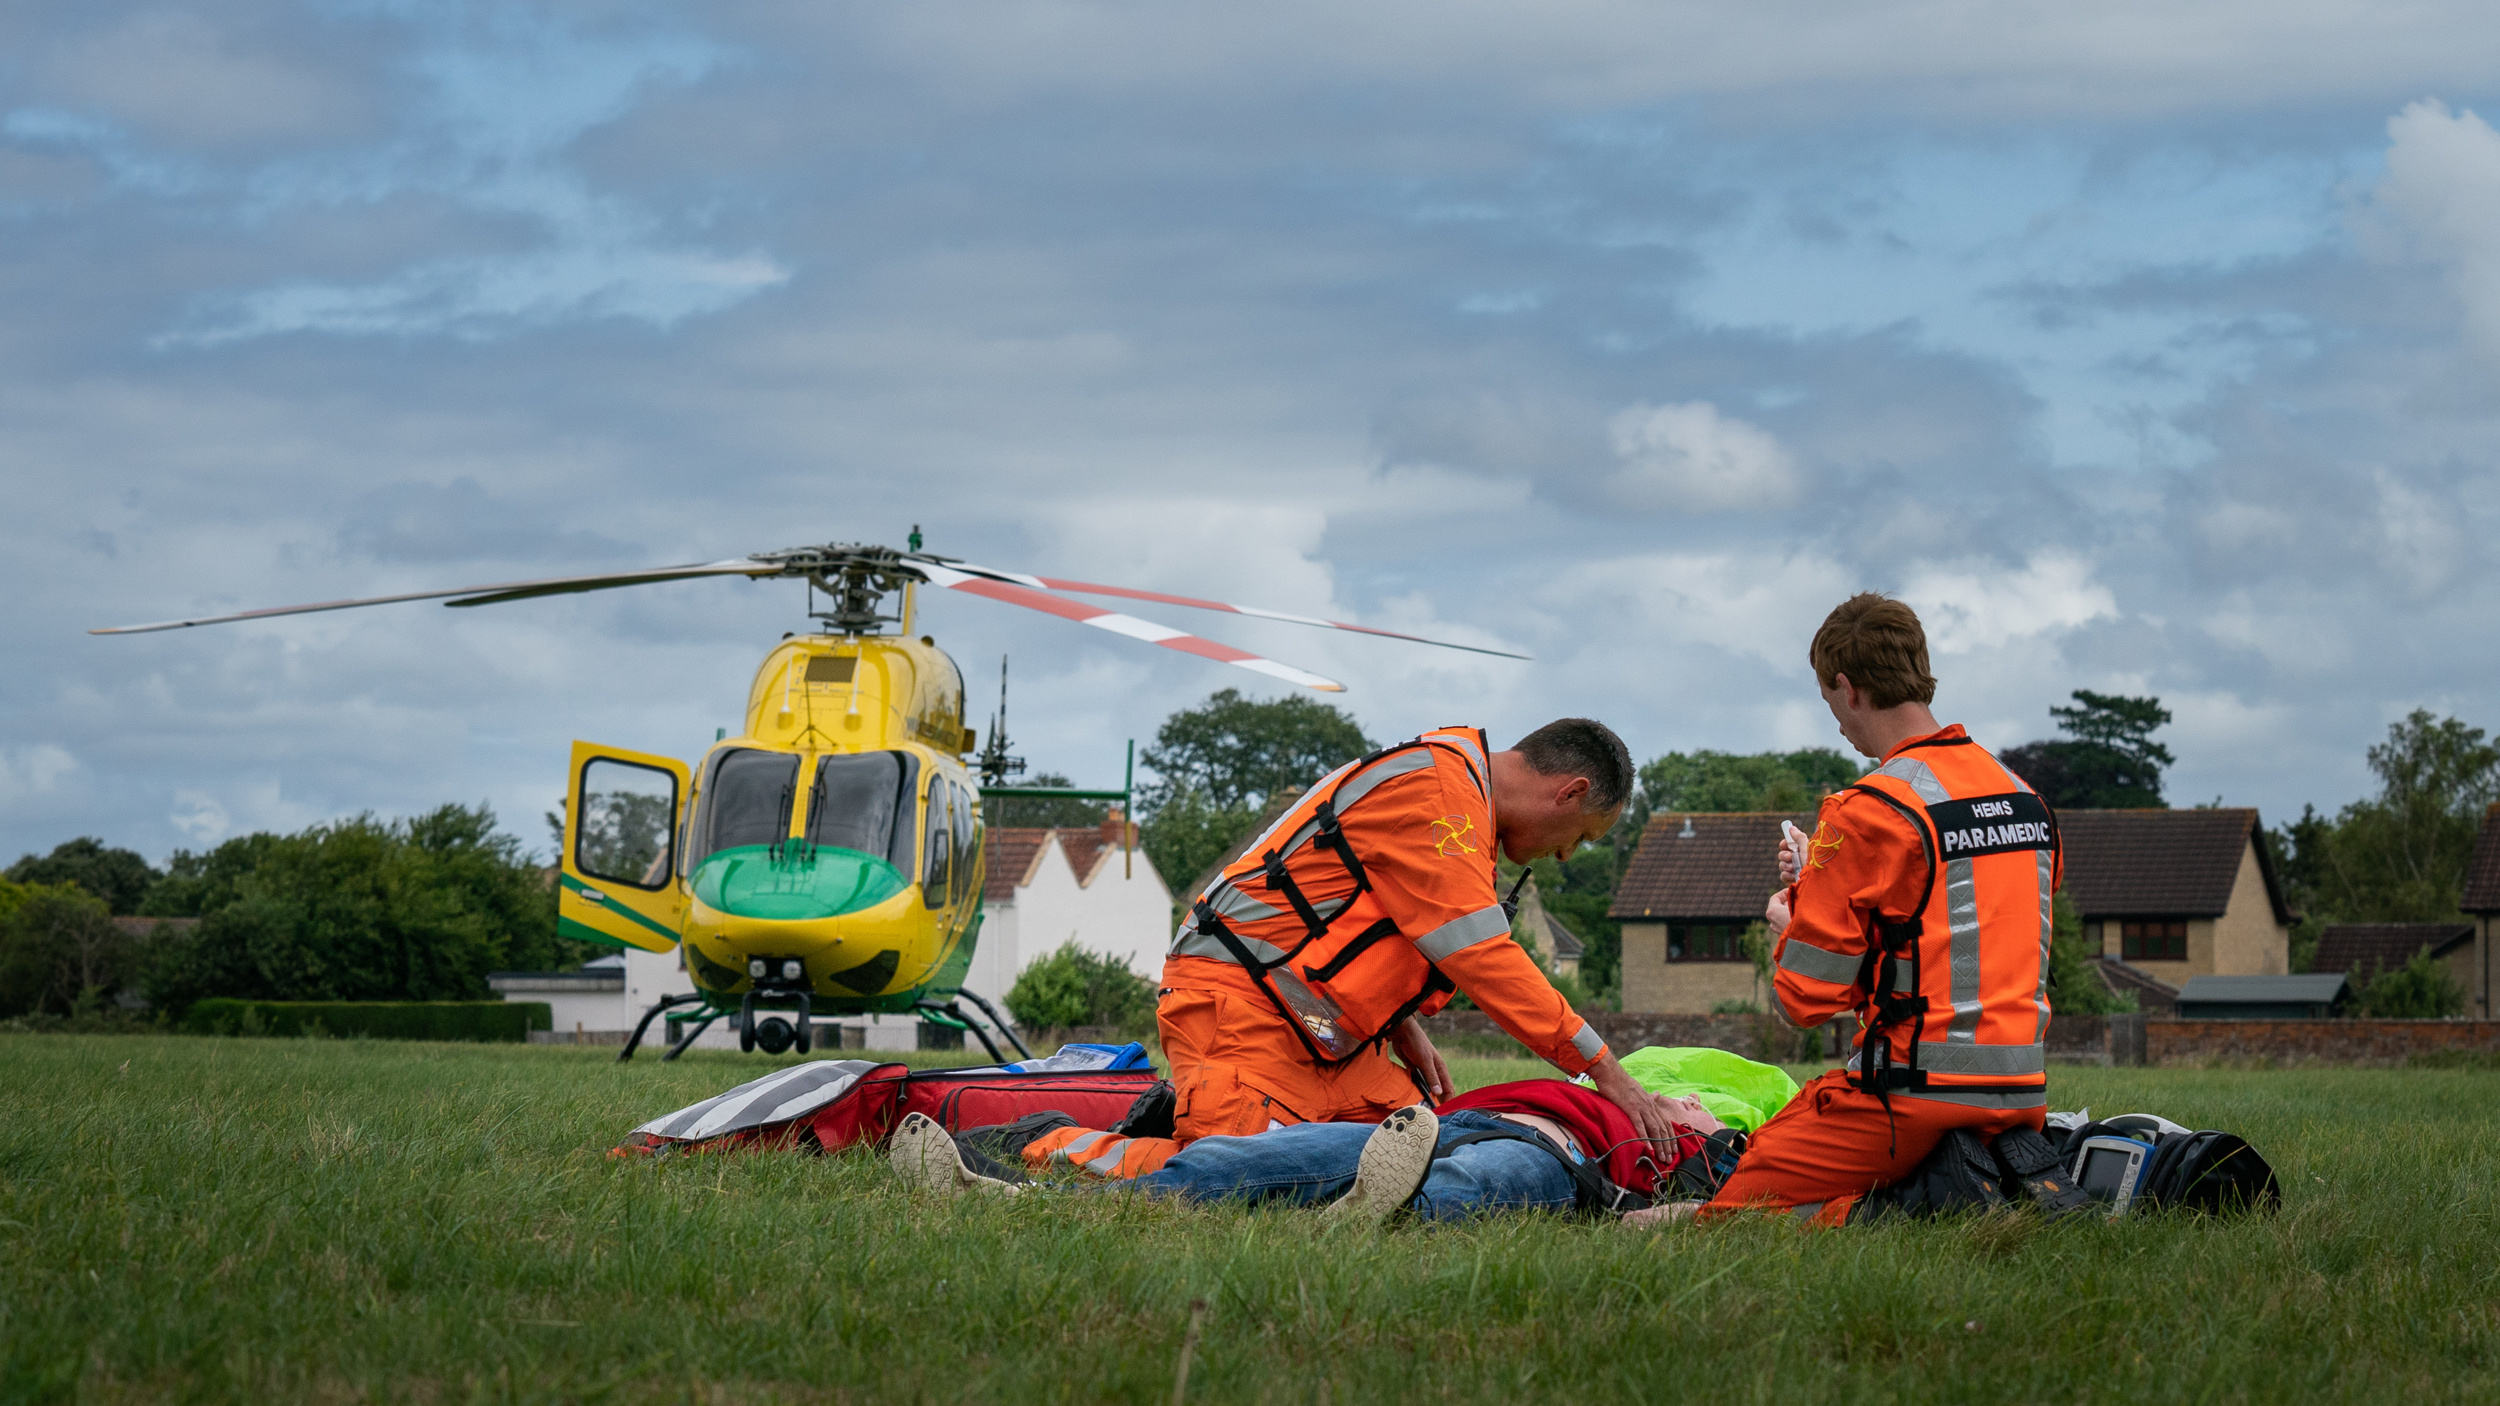 Two paramedics knelt next to a staged incident patient in a field with the helicopter in the background